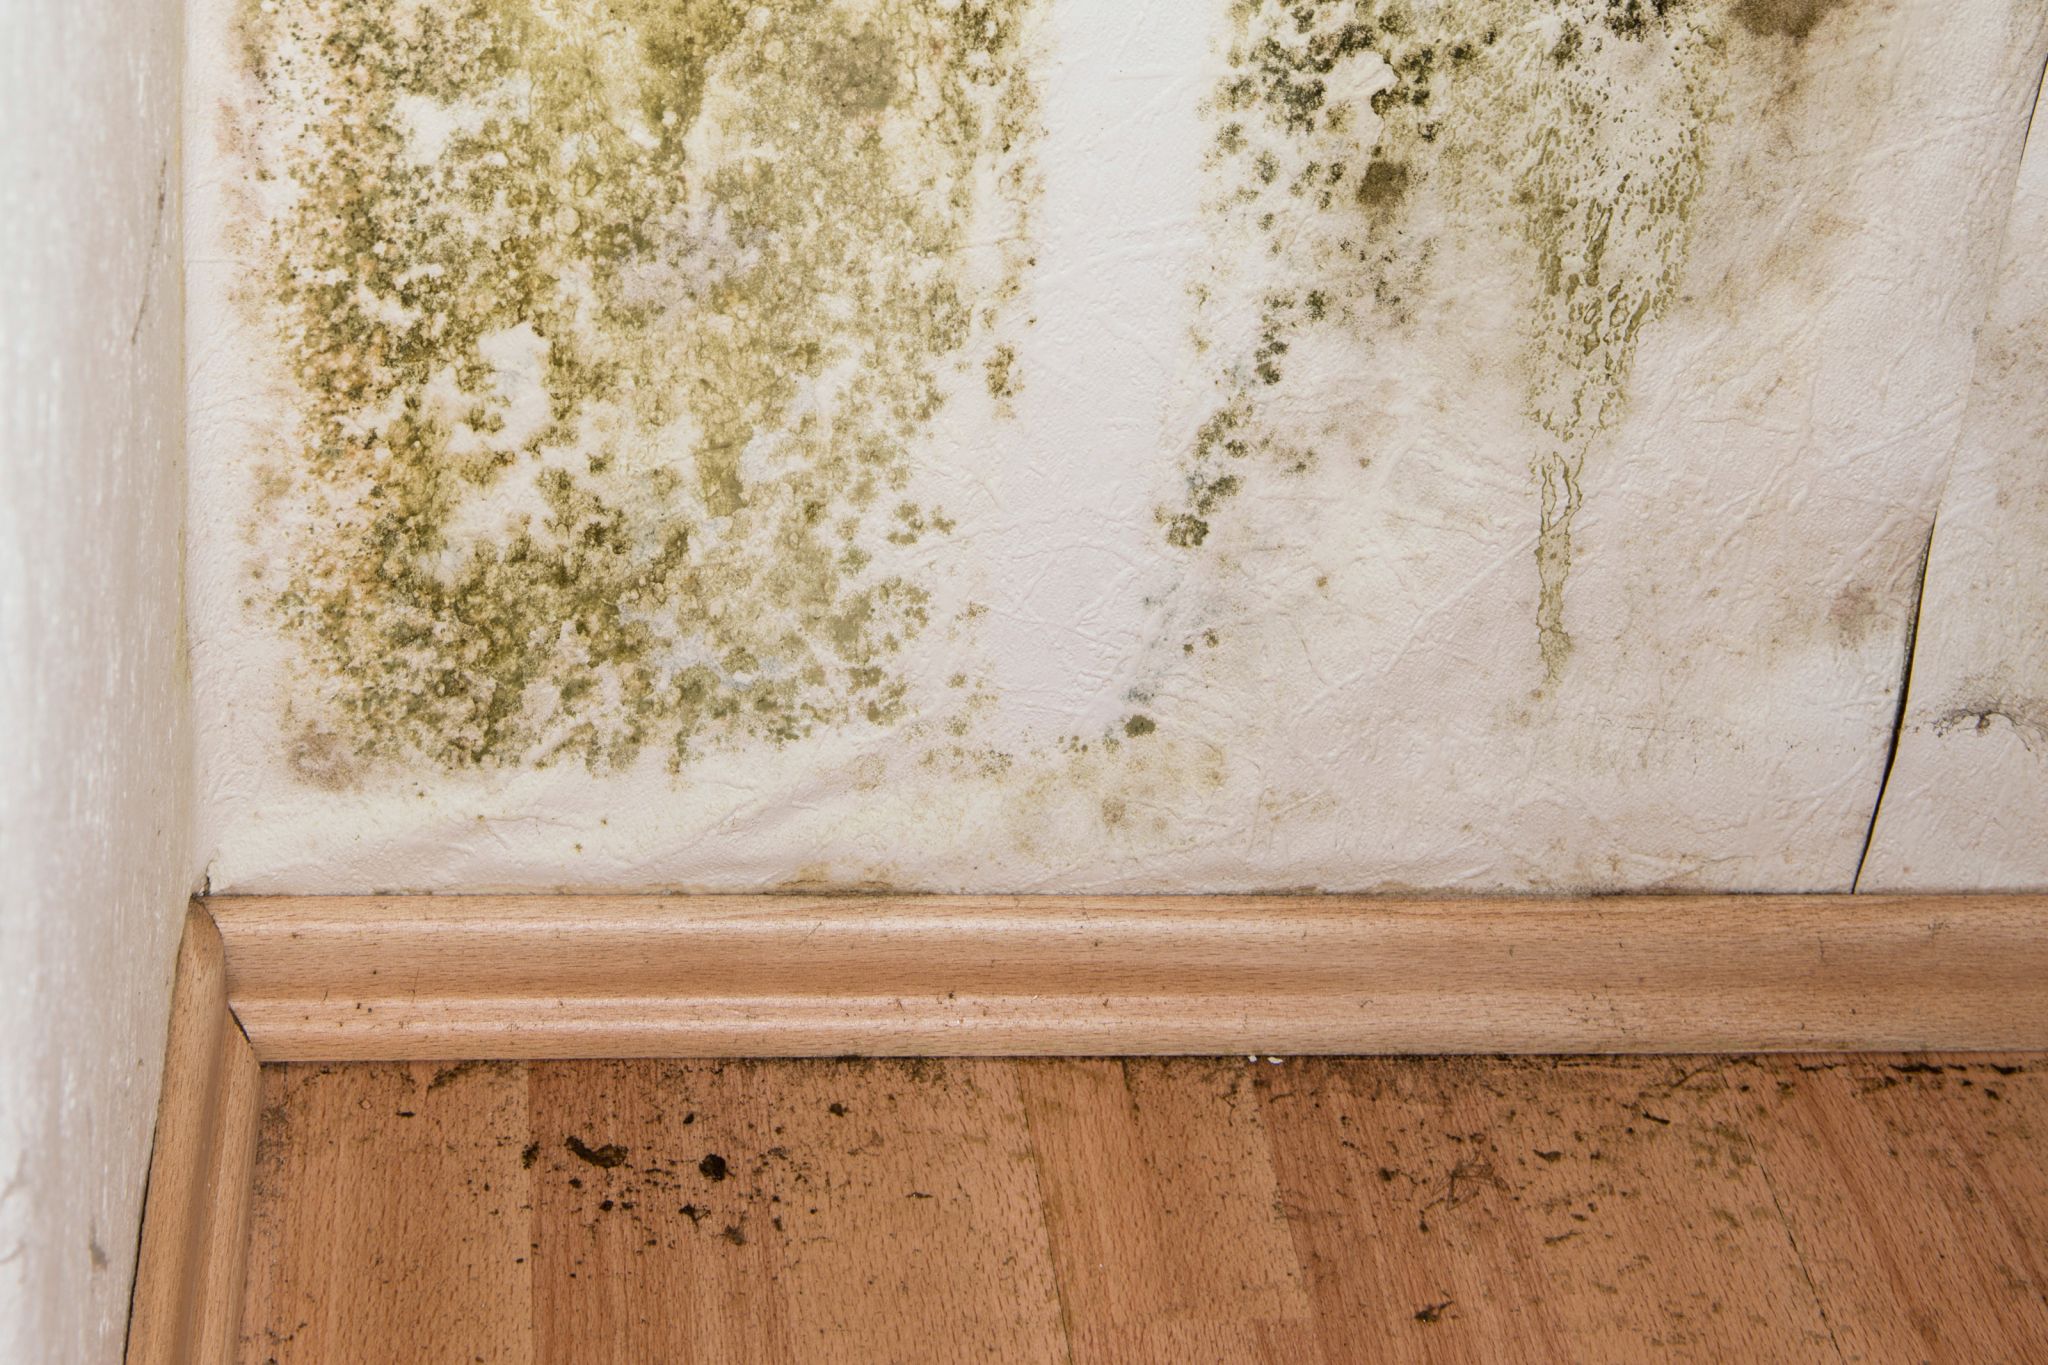 Mold on an interior wall of a home